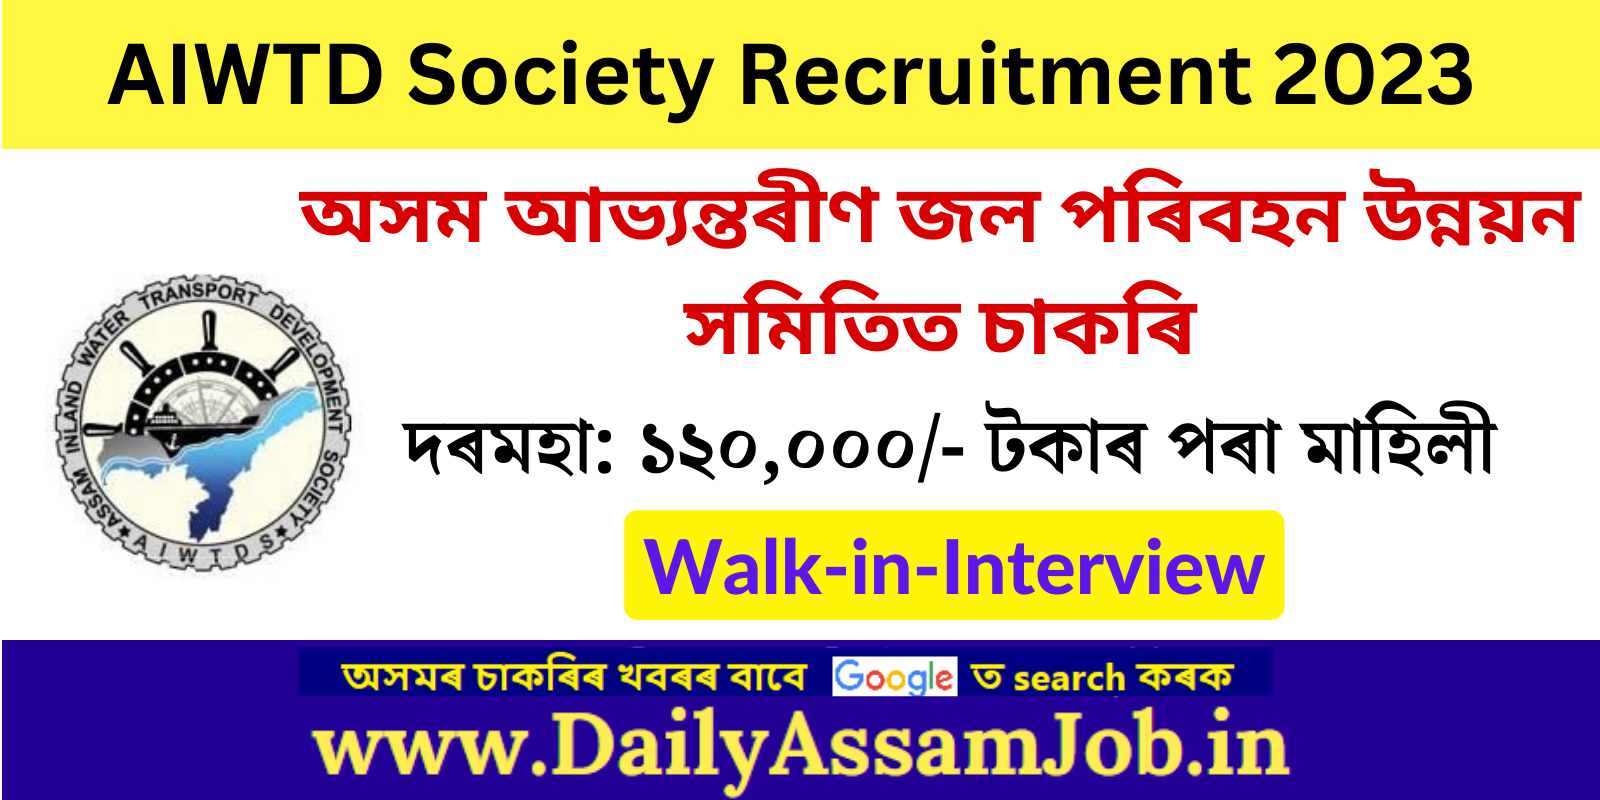 AIWTD Society Recruitment 2023 - Apply for Environmental Specialist Vacancy